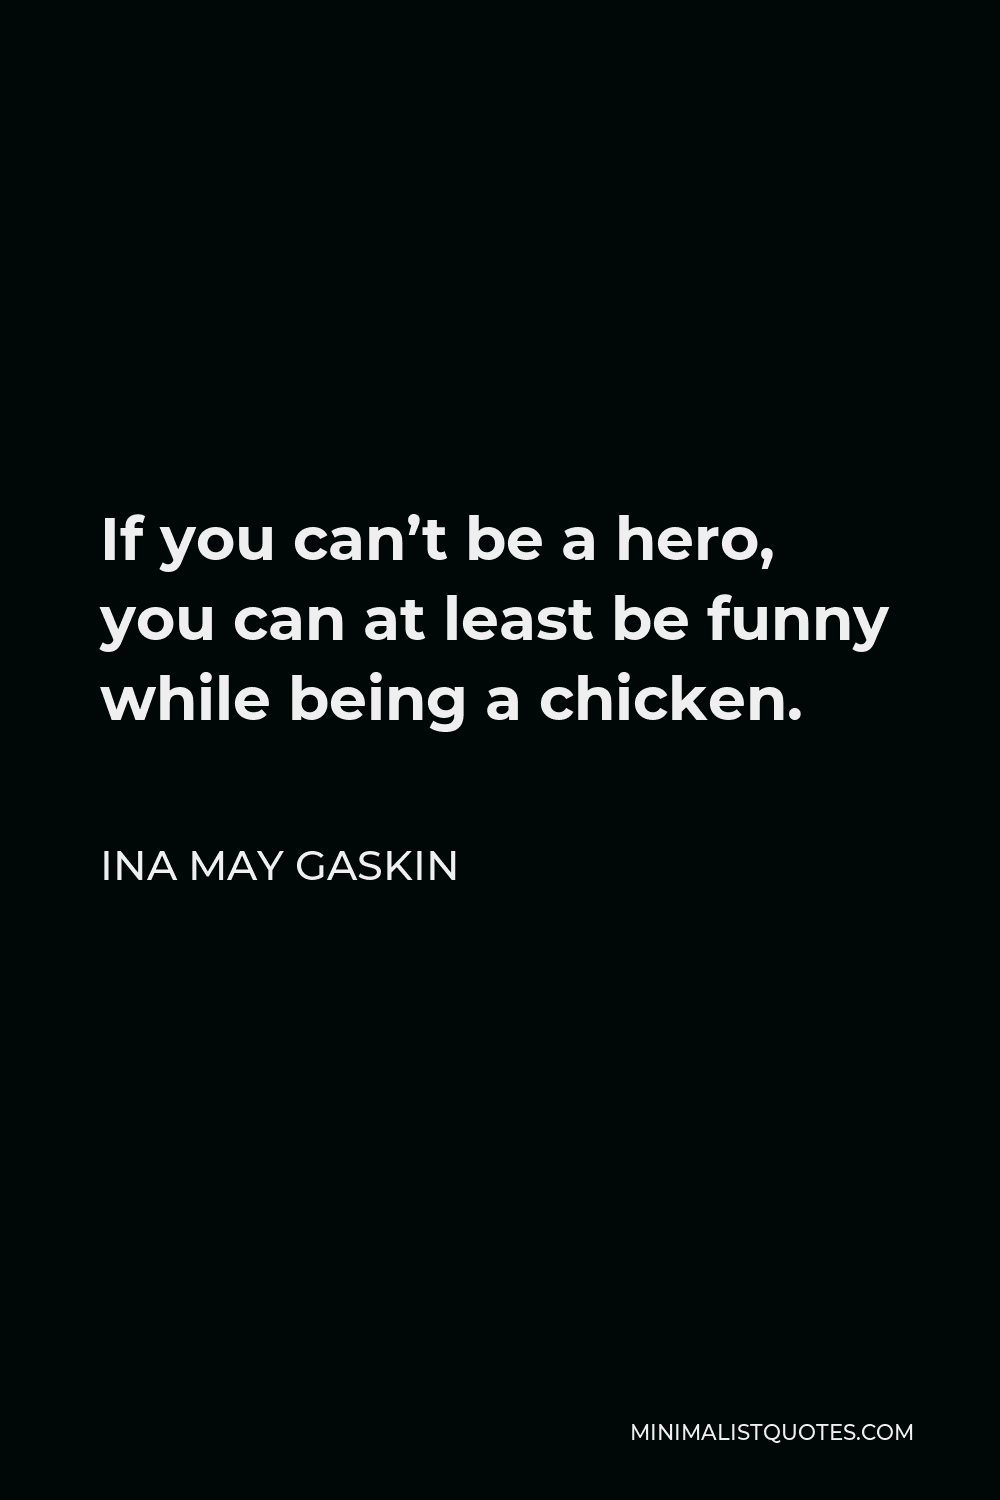 Ina May Gaskin Quote - If you can’t be a hero, you can at least be funny while being a chicken.